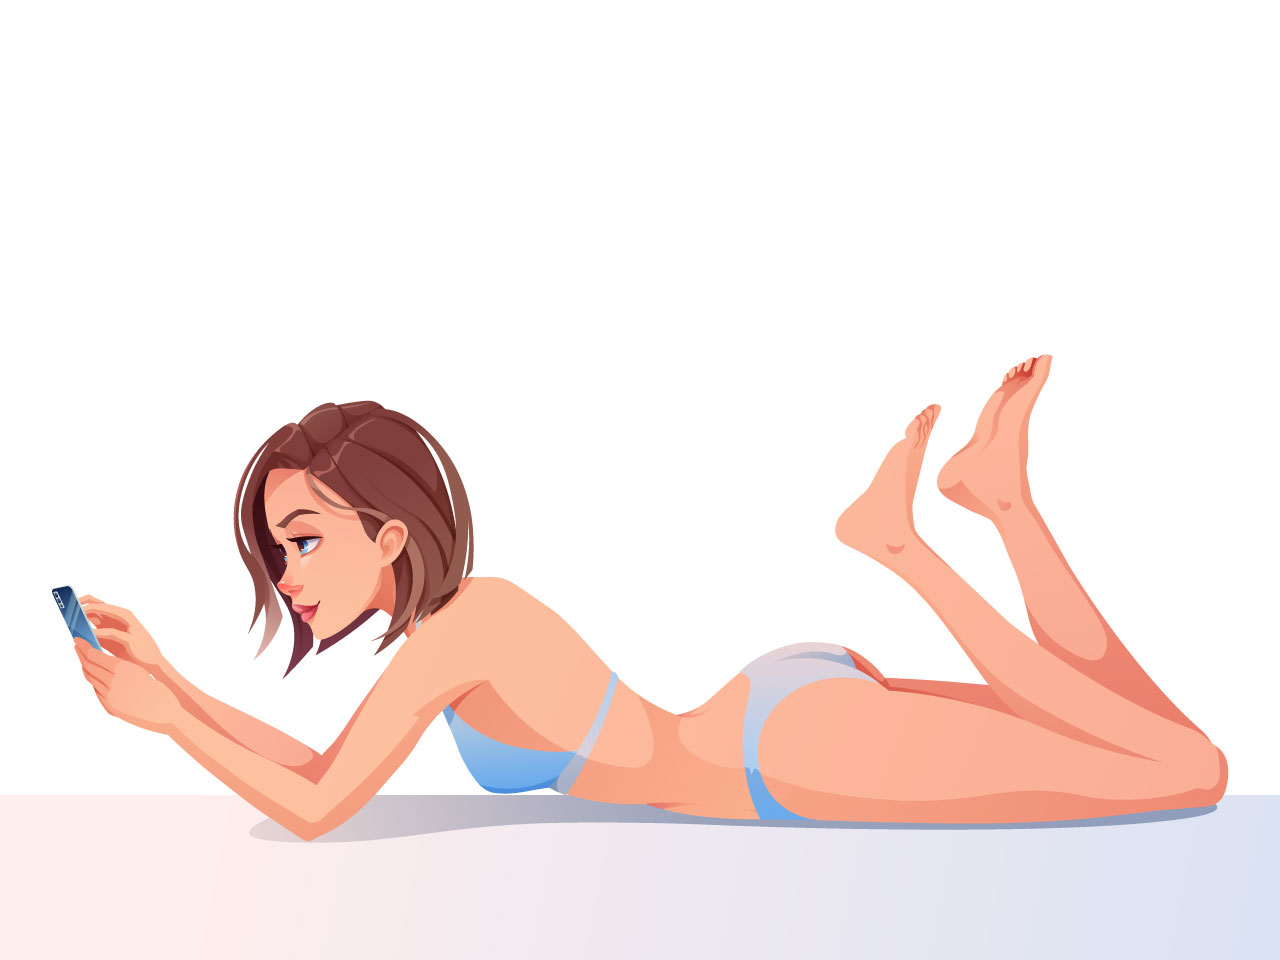 Bikini clipart woman bathing suit lies with phone her hands vacation beach